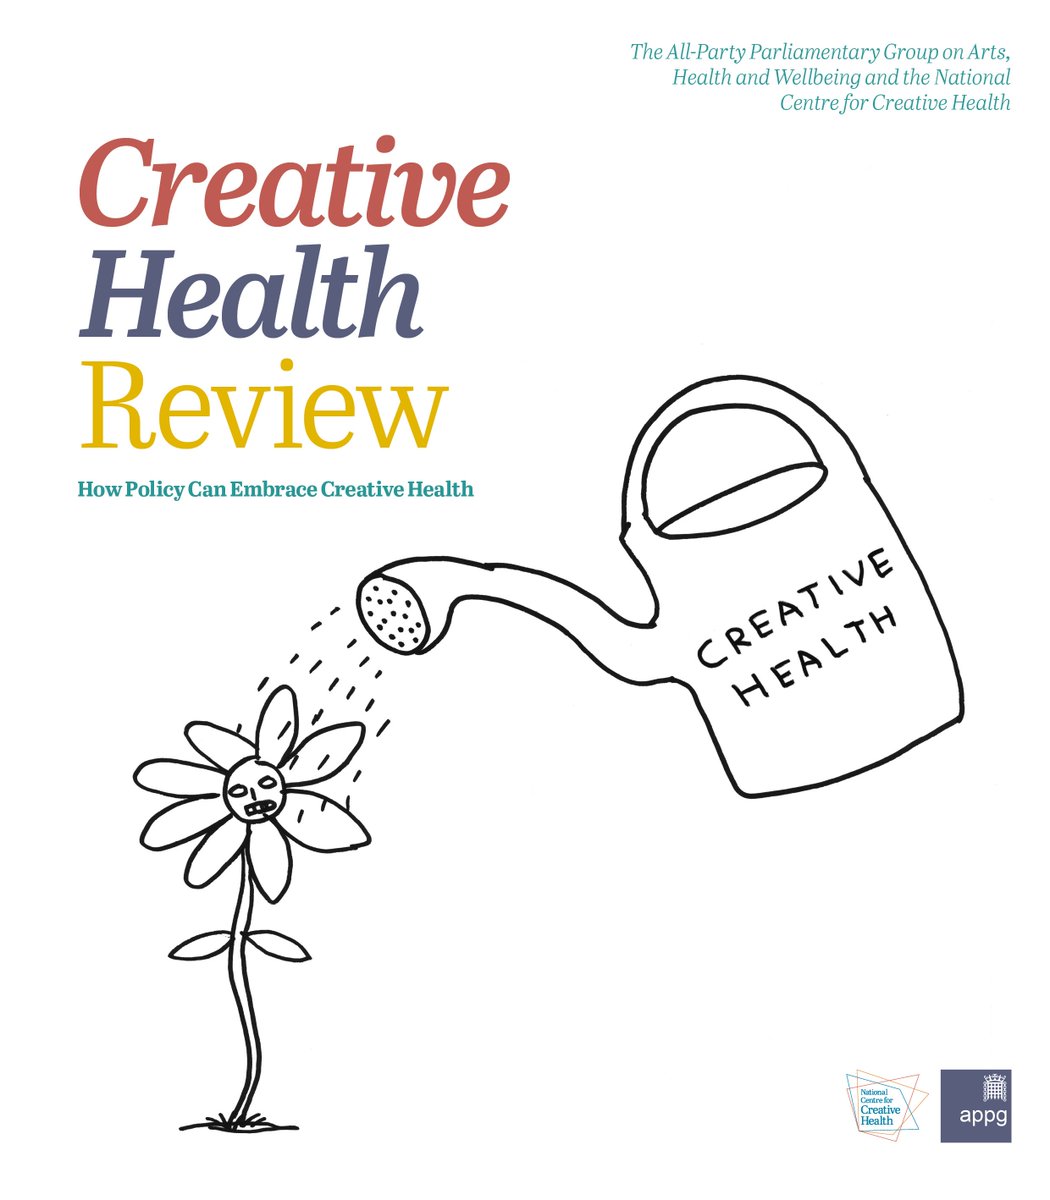 The #CreativeHealthReview report is out and we're pleased to share that it features our partnership work here in Gloucestershire where we've been working together to help people live well with chronic pain as part of our commitment to creative health ncch.org.uk/creative-healt…